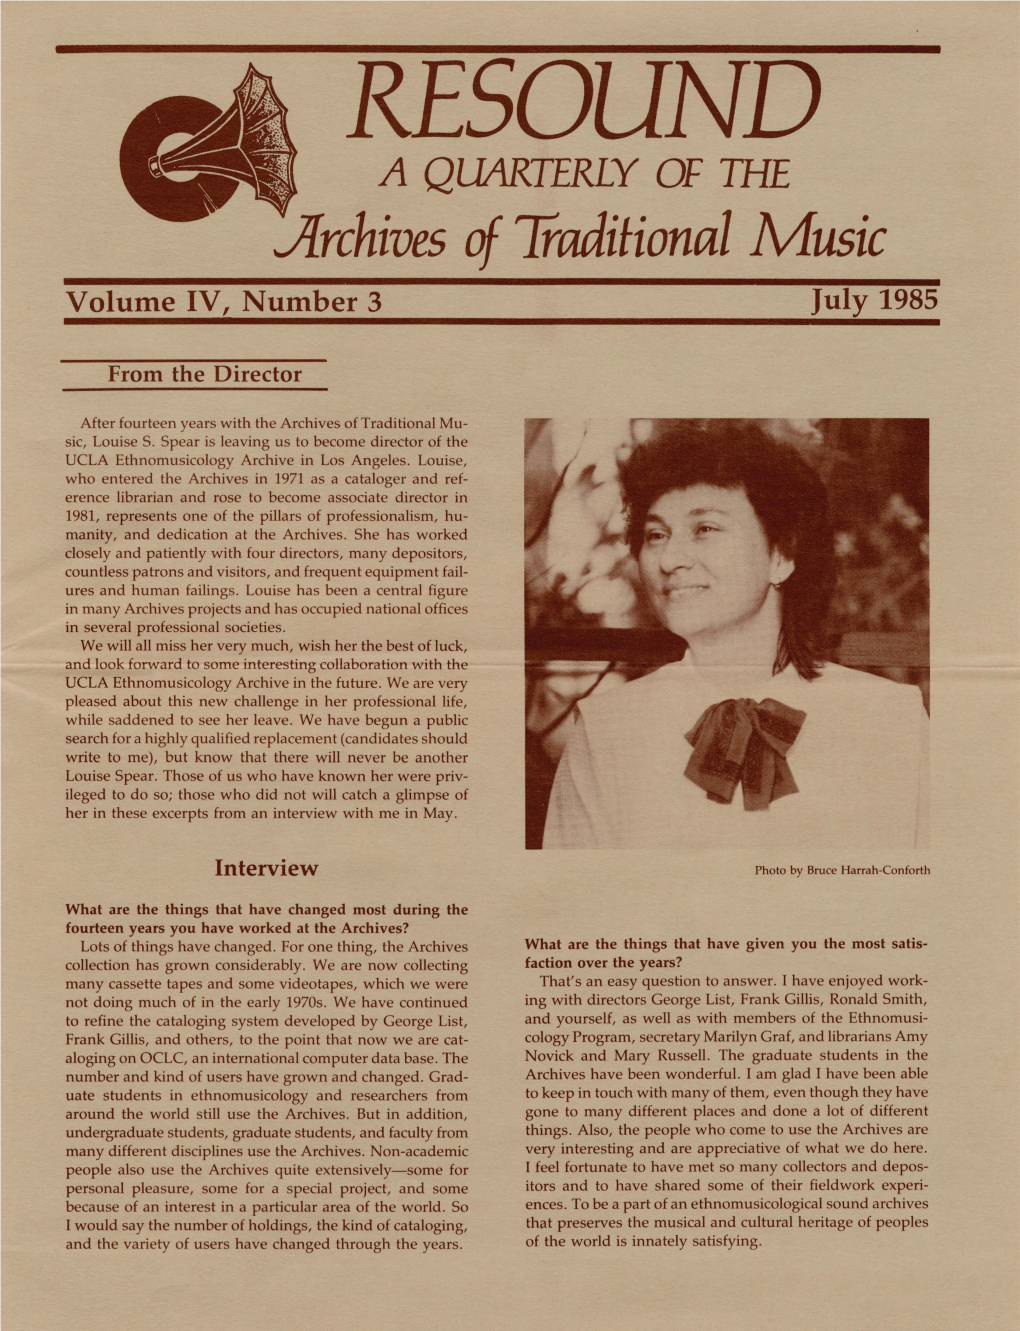 RESOUND a QUARTERLY of the Archives of Traditional Music Volume IV, Number 3 July 1985